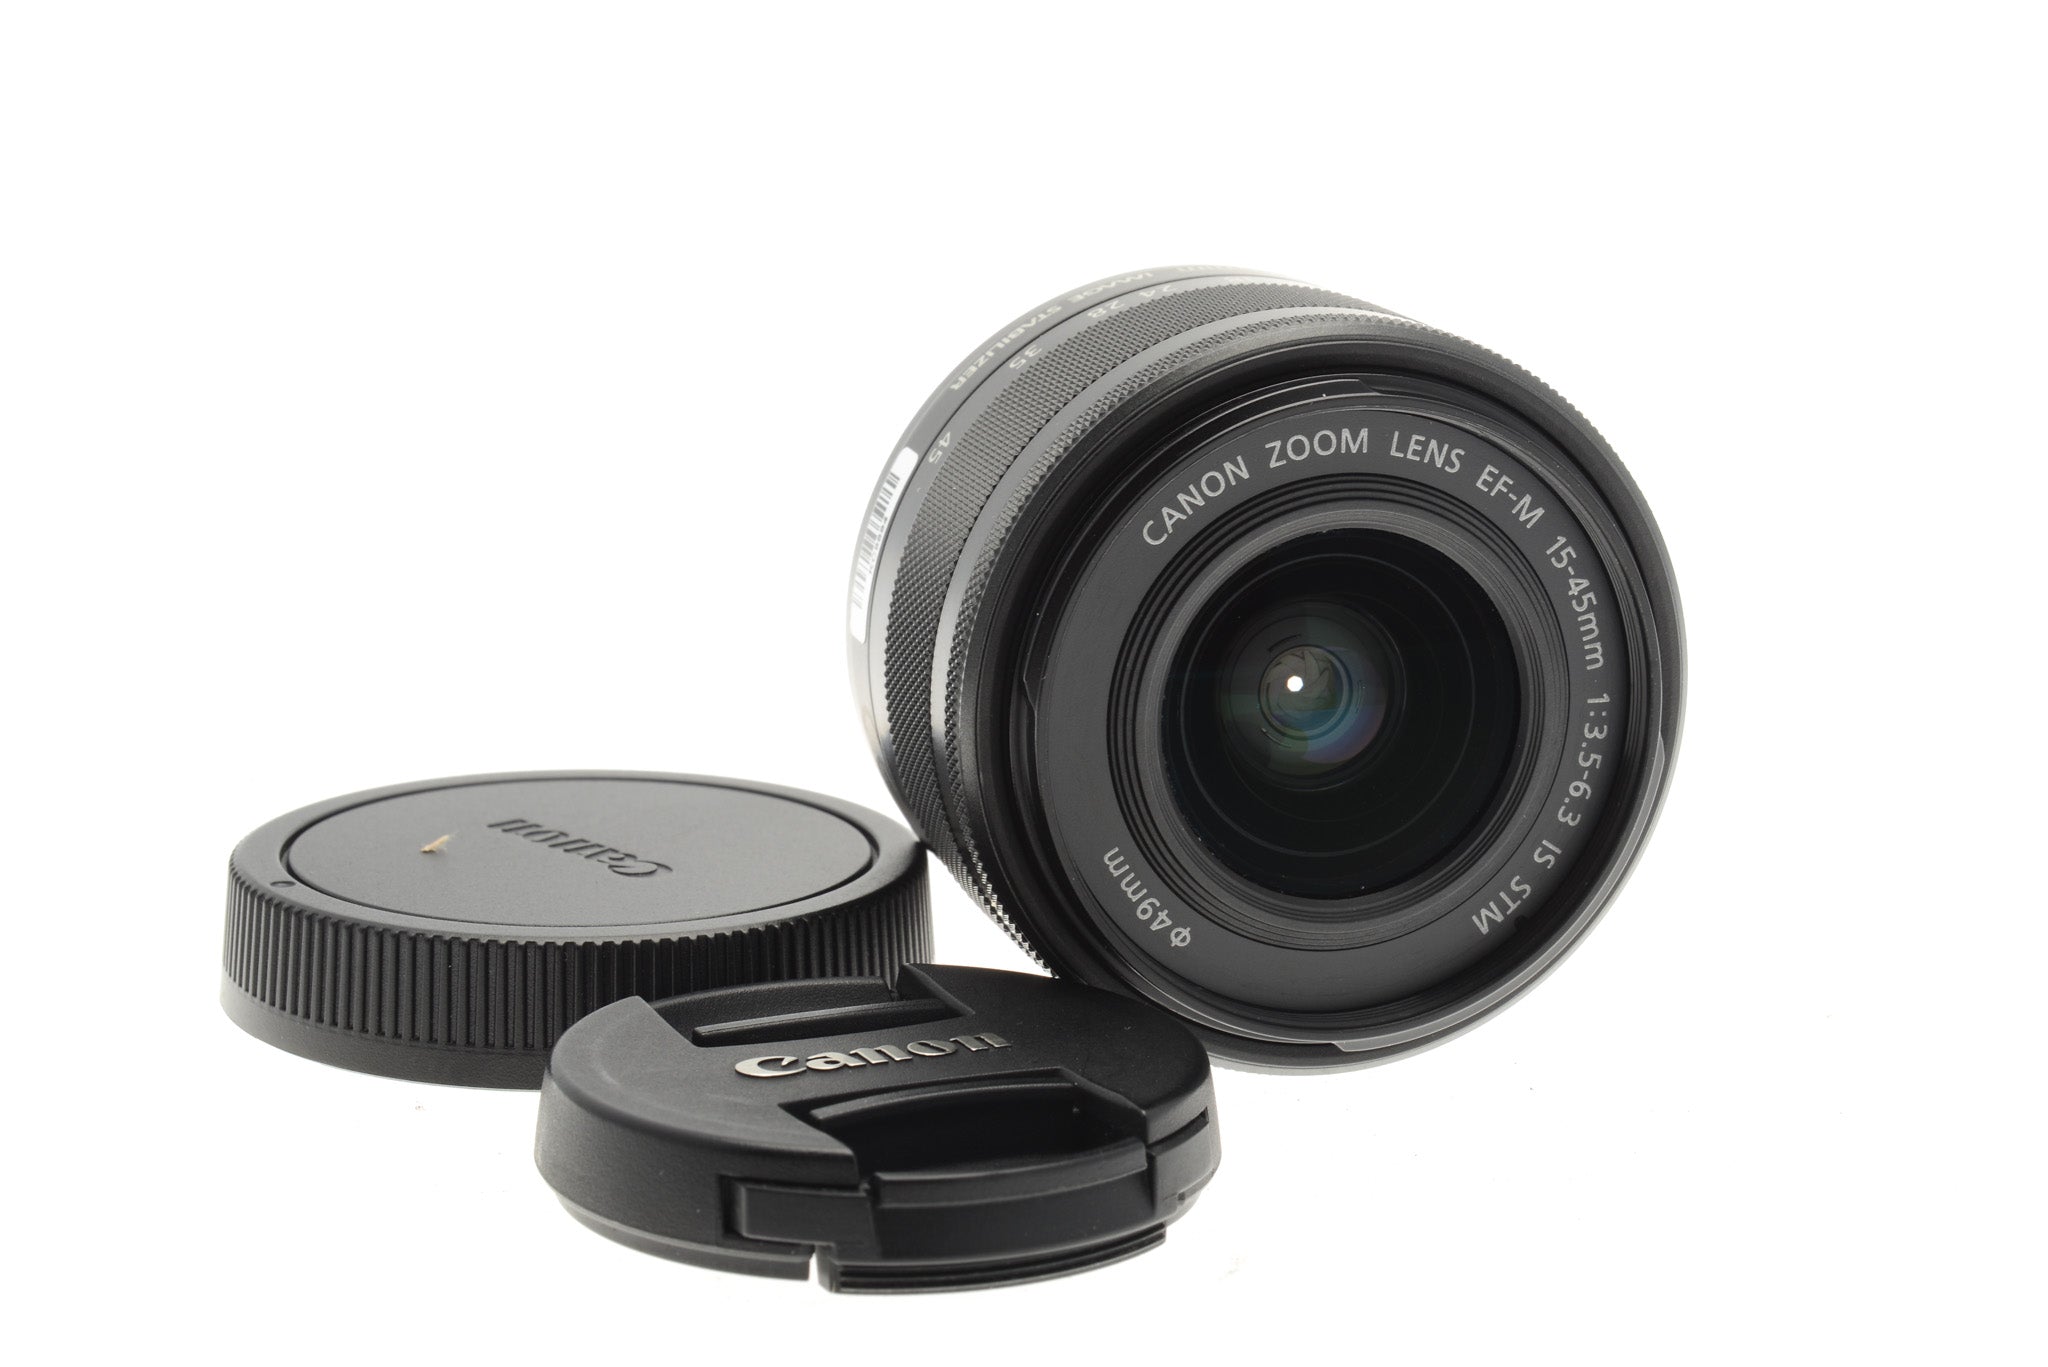 CANON EF-M15-45mm F3.5-6.3 IS STM-